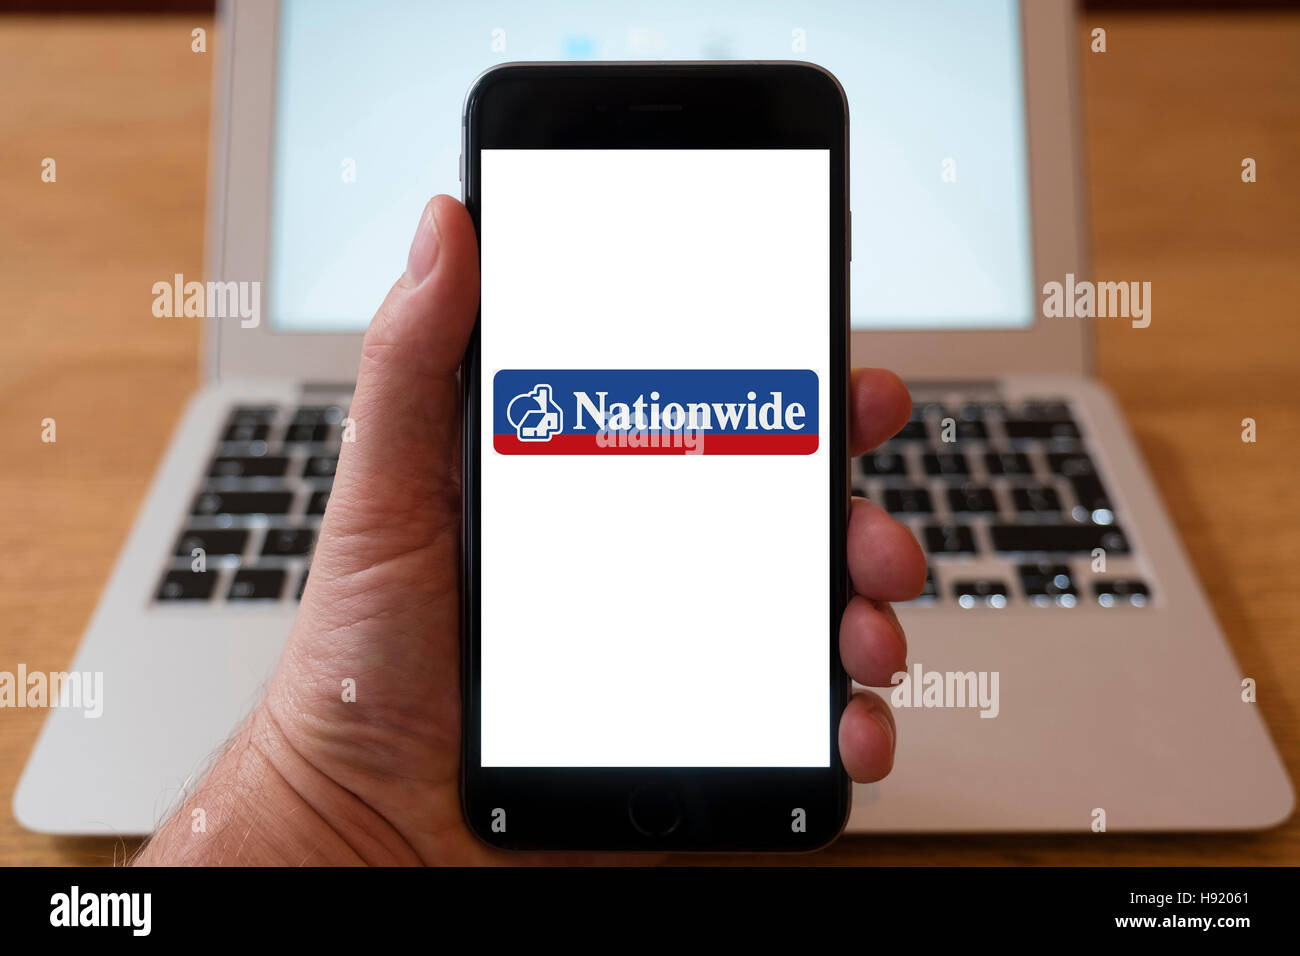 Using iPhone smart phone to display website logo of Nationwide British mutual financial institution Stock Photo